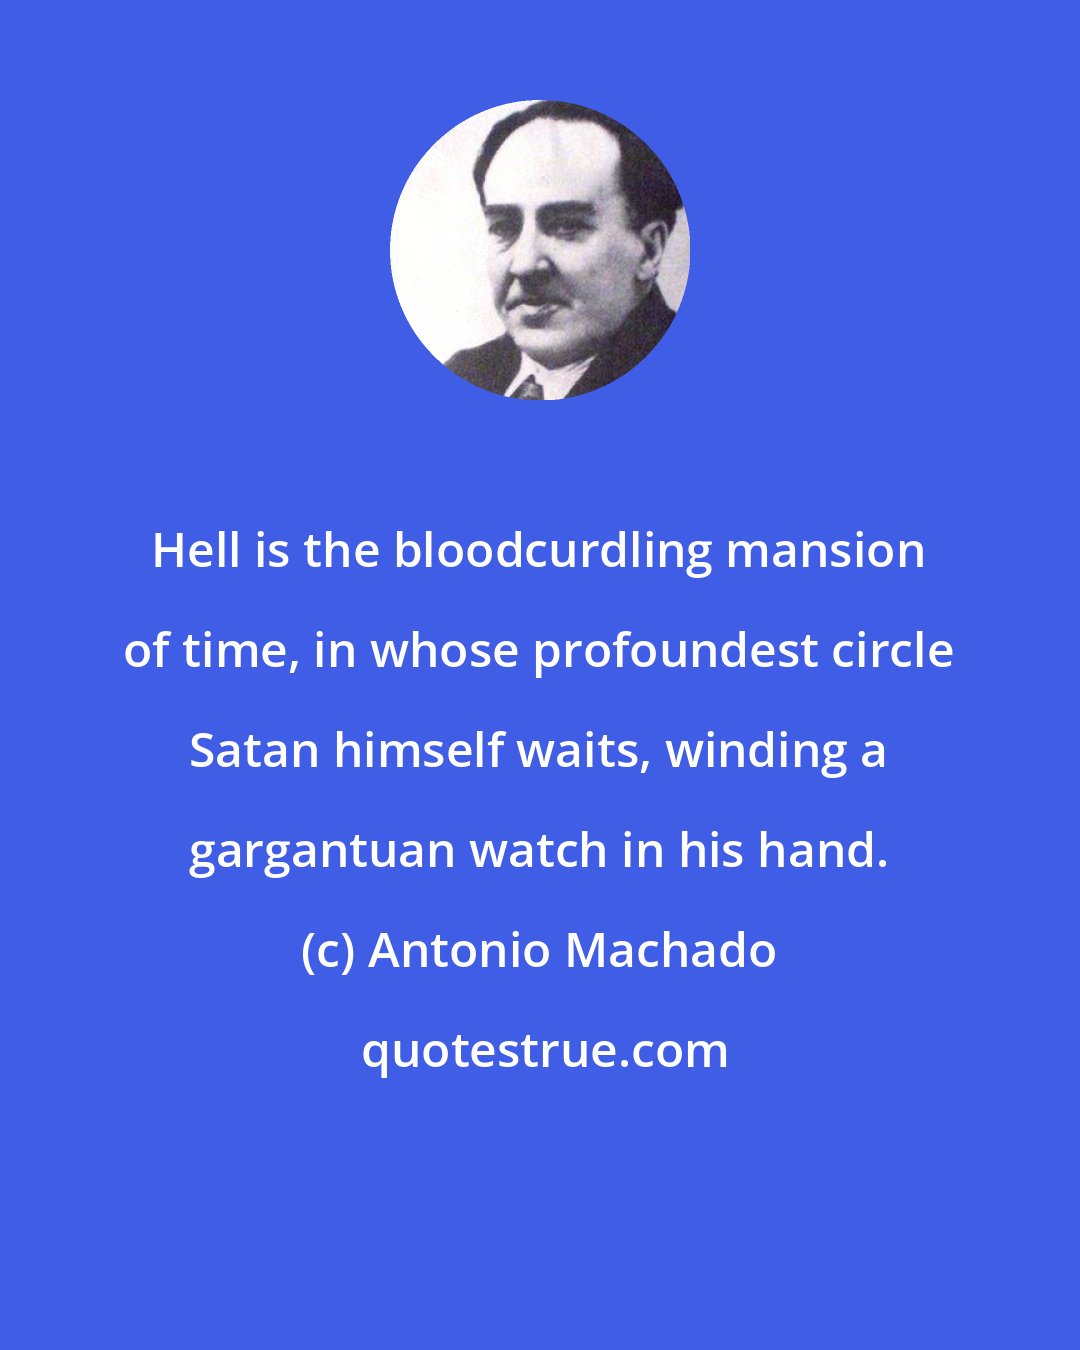 Antonio Machado: Hell is the bloodcurdling mansion of time, in whose profoundest circle Satan himself waits, winding a gargantuan watch in his hand.